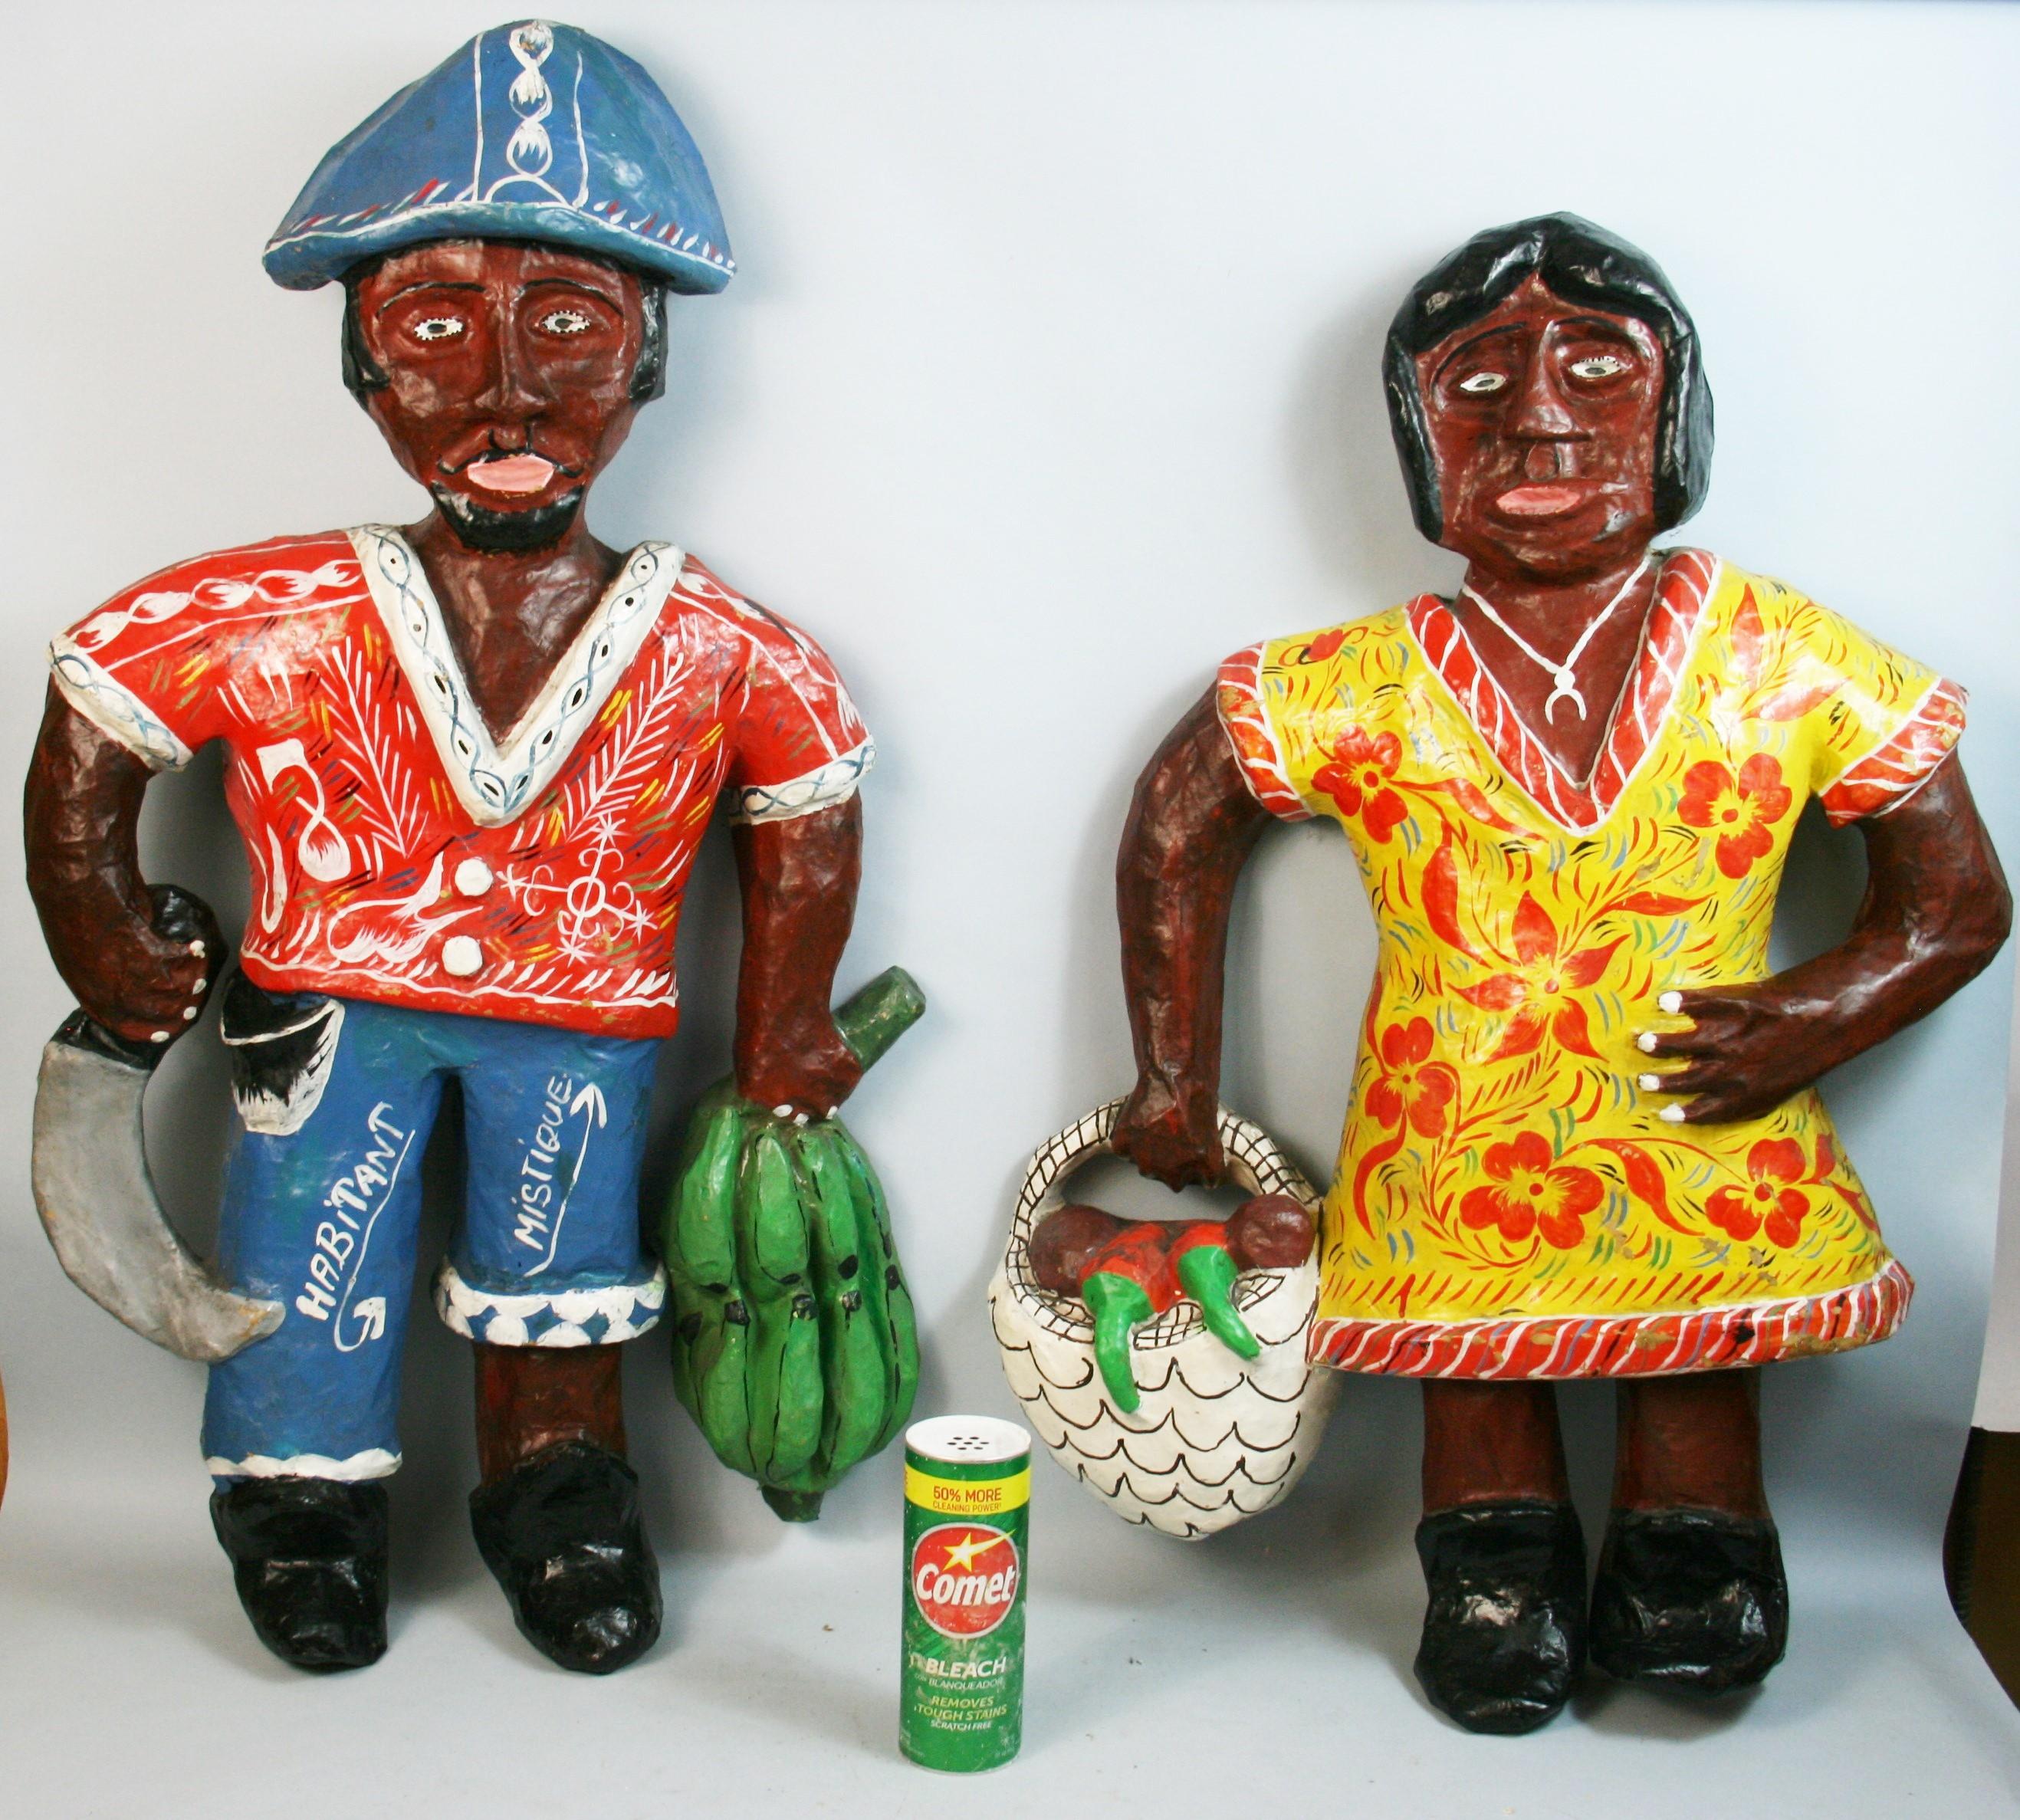 1482 Pair Primitive hand made and painted Caribbean figural wall sculptures
made from corrugated boxes and hand painted